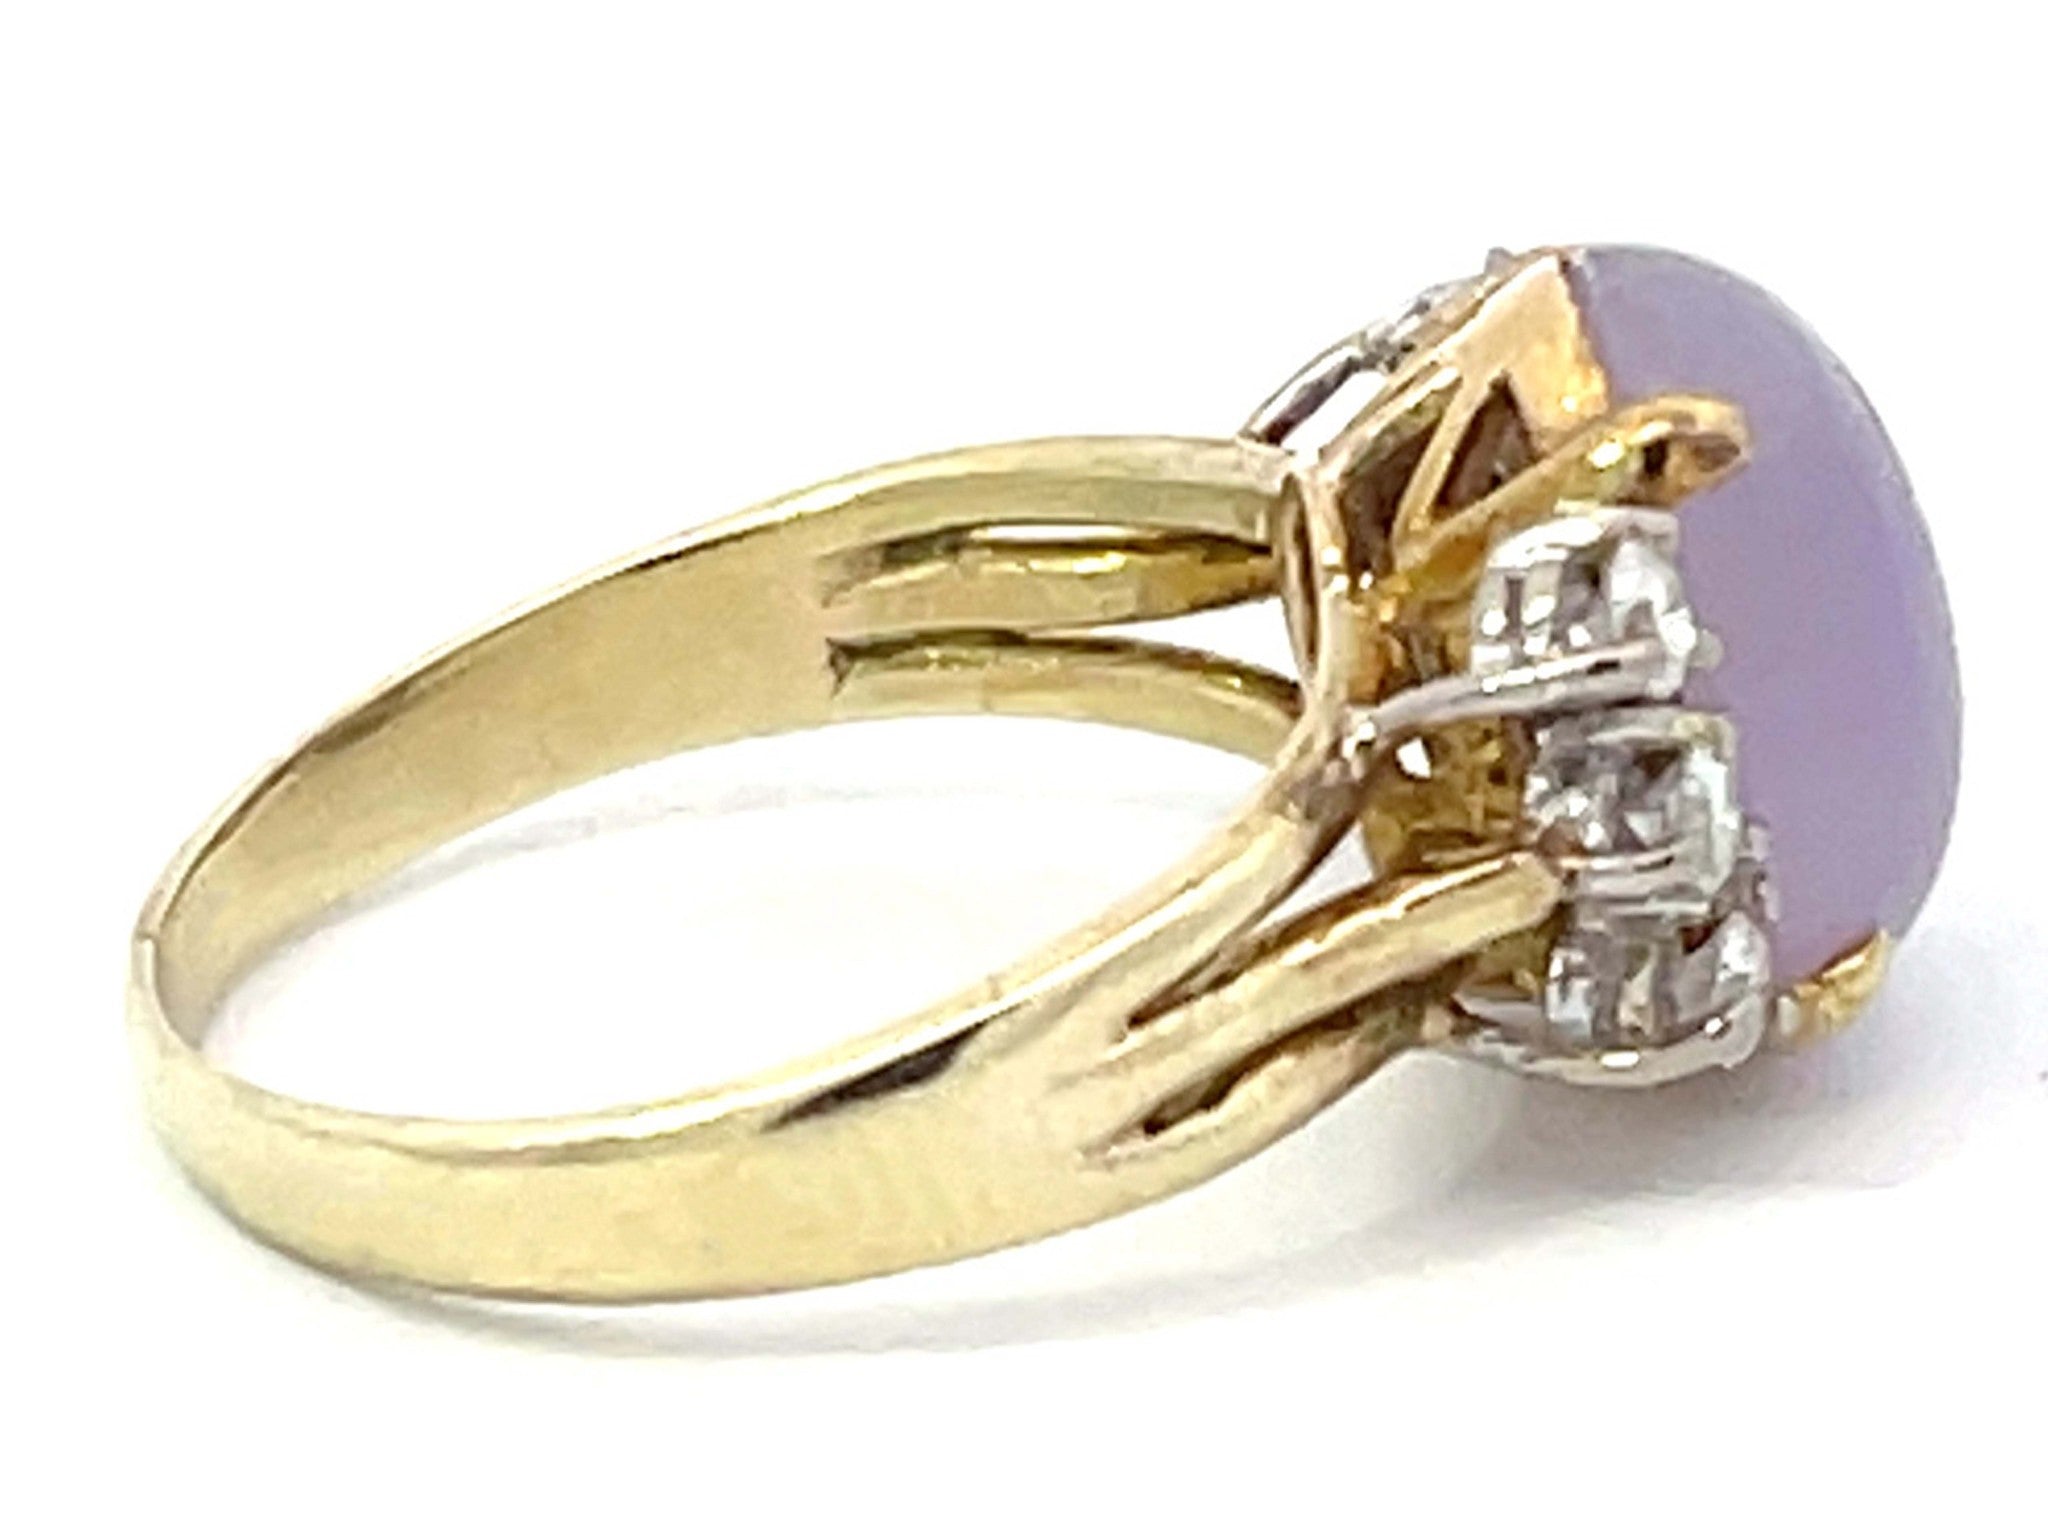 Lavender Jade and Diamond Ring in 14k Yellow Gold